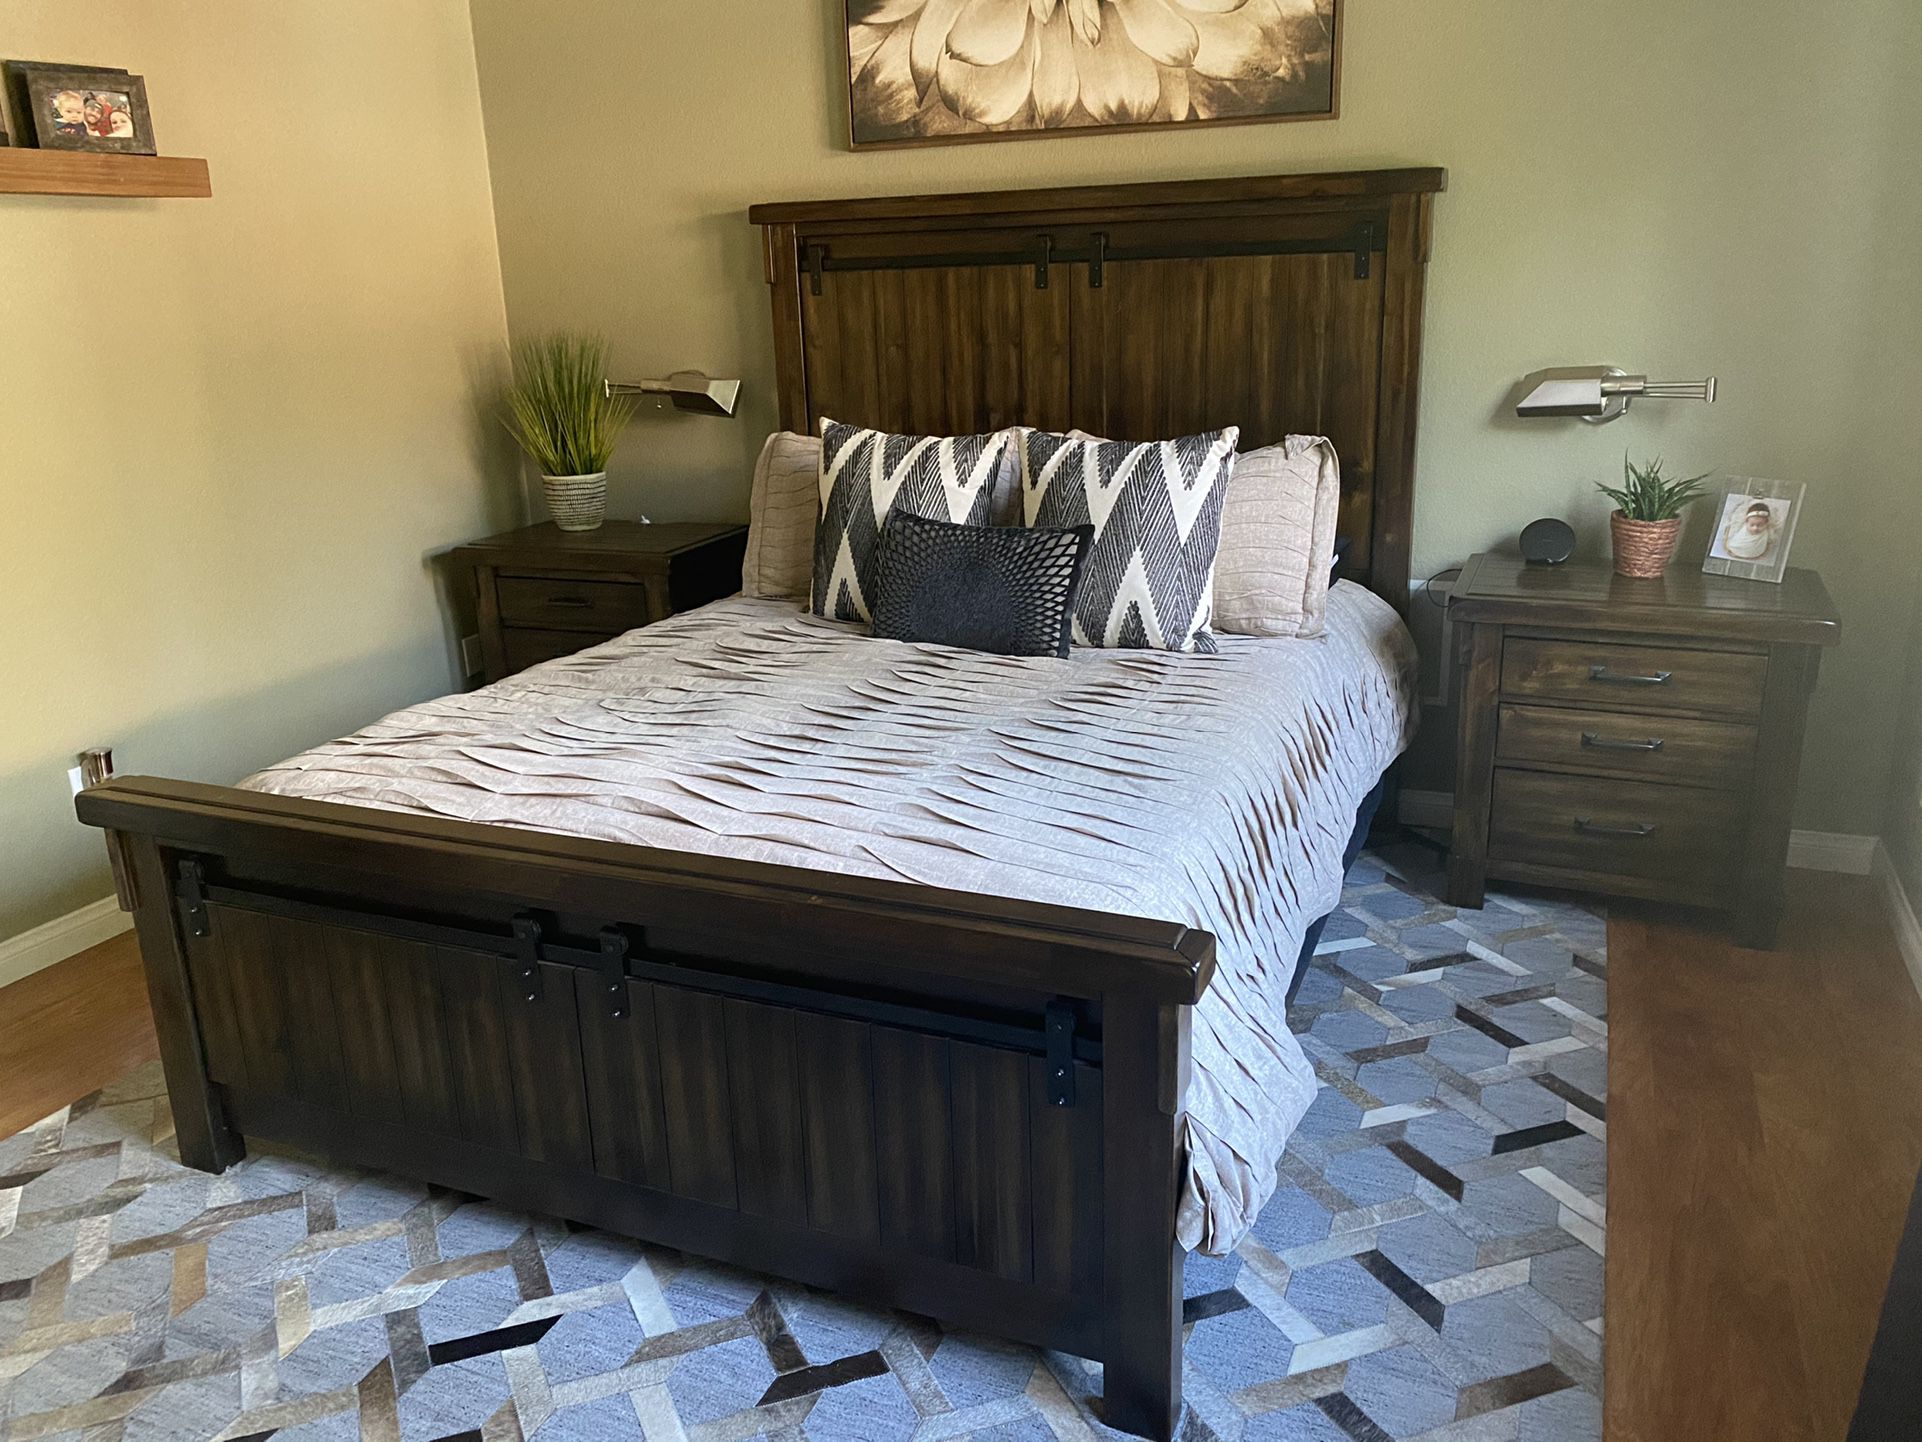 Queen Bedroom Set With 2 Nightstands Includes Mattress, Box Spring, And Pillow Top